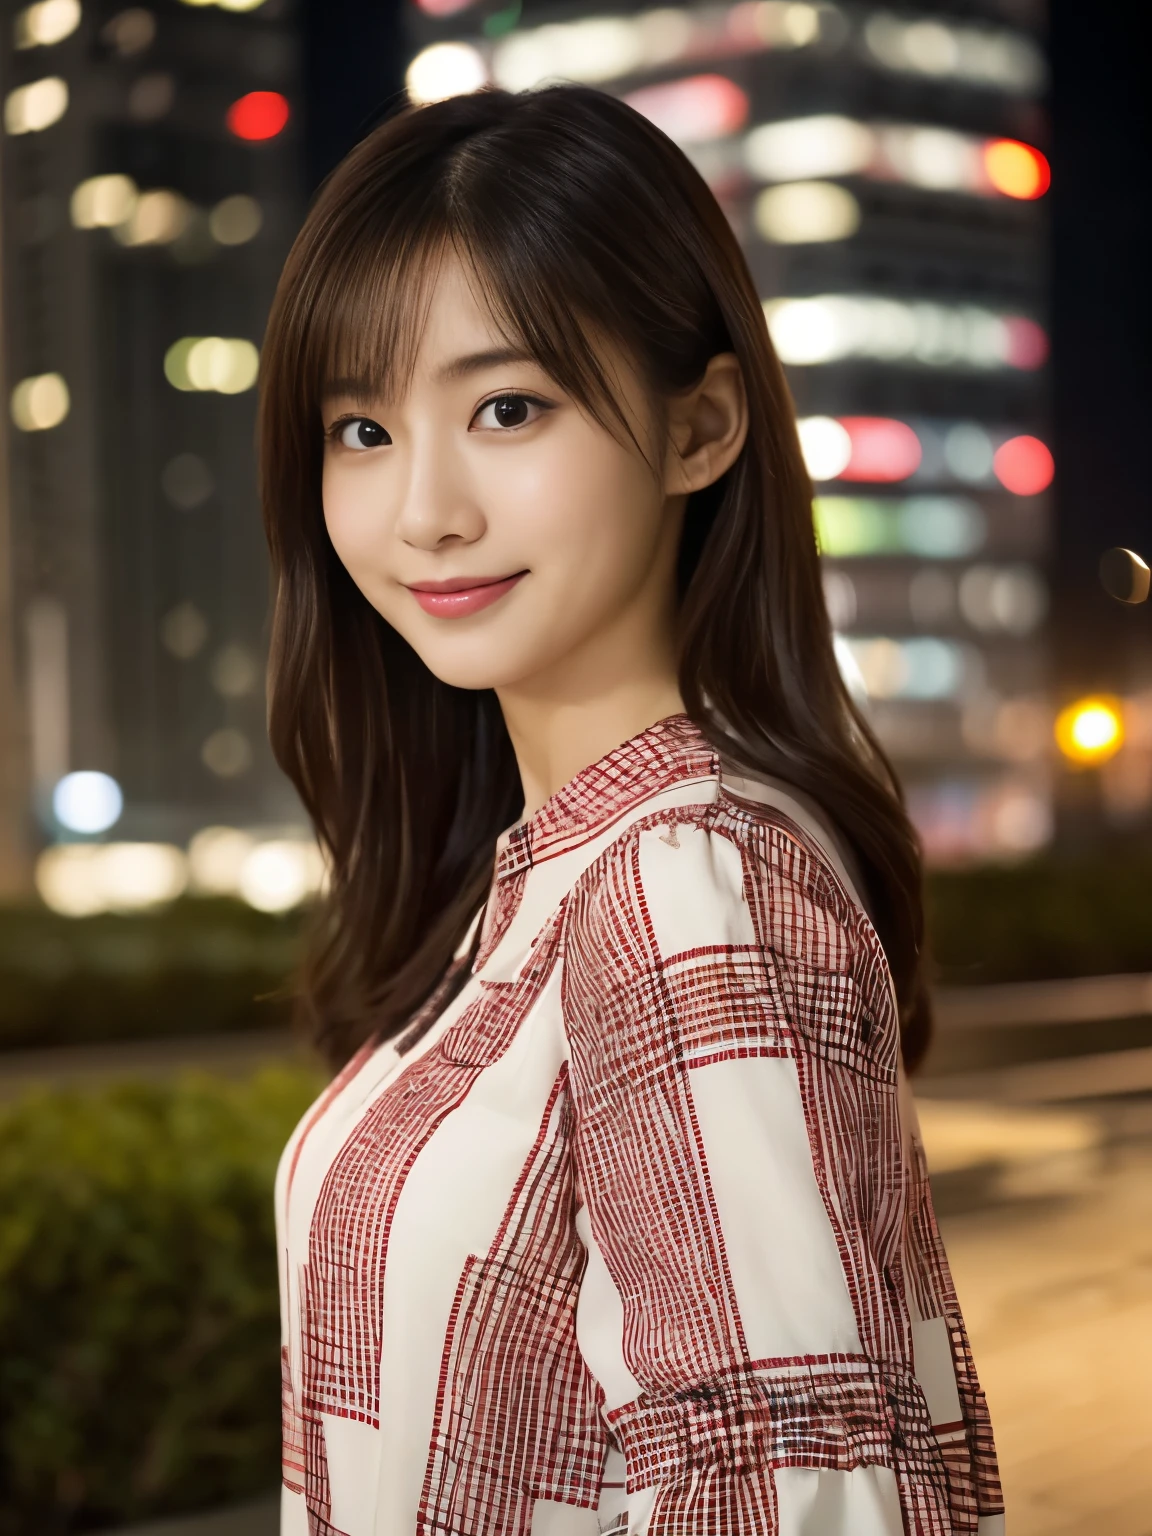 1 girl, (wearing a Check pattern red blouse:1.2), Beautiful Japan actress,
(RAW photo, highest quality), (realistic, Photoreal:1.4), masterpiece, 
very delicate and beautiful, very detailed, 2k wallpaper, wonderful, 
finely, Very detailed CG Unity 8K wallpaper, super detailed, High resolution, 
soft light, beautiful detailed girl, very detailed目と顔, beautifully detailed nose, beautiful and fine eyes, 
cinematic lighting, Against the backdrop of the cityscape at night, city lights, perfect anatomy, Random Body Orientation, slender body, smile